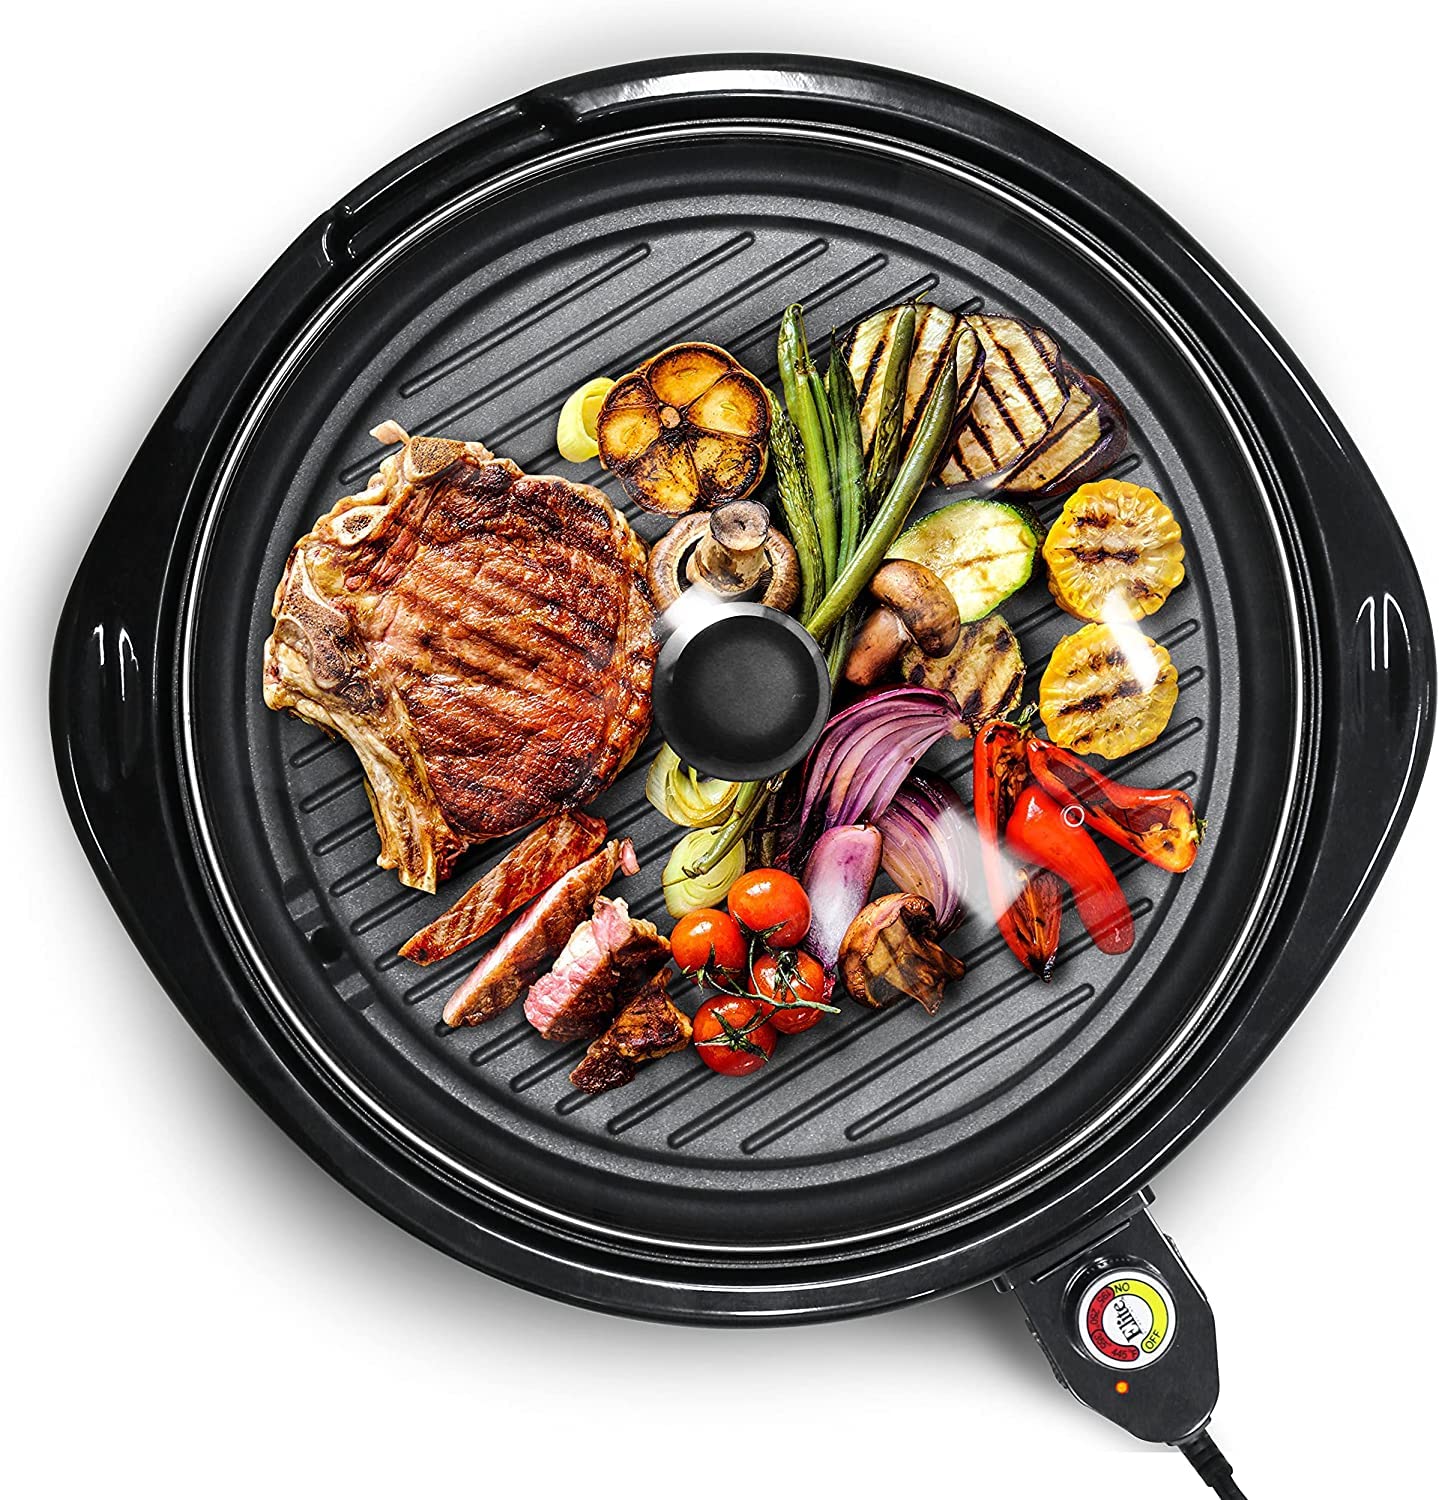 Elite Gourmet Smokeless Indoor Electric BBQ Grill with Glass Lid, Dishwasher Safe, Nonstick, Adjustable Temperature, Fast Heat Up, Low-Fat Meals Easy to Clean Design